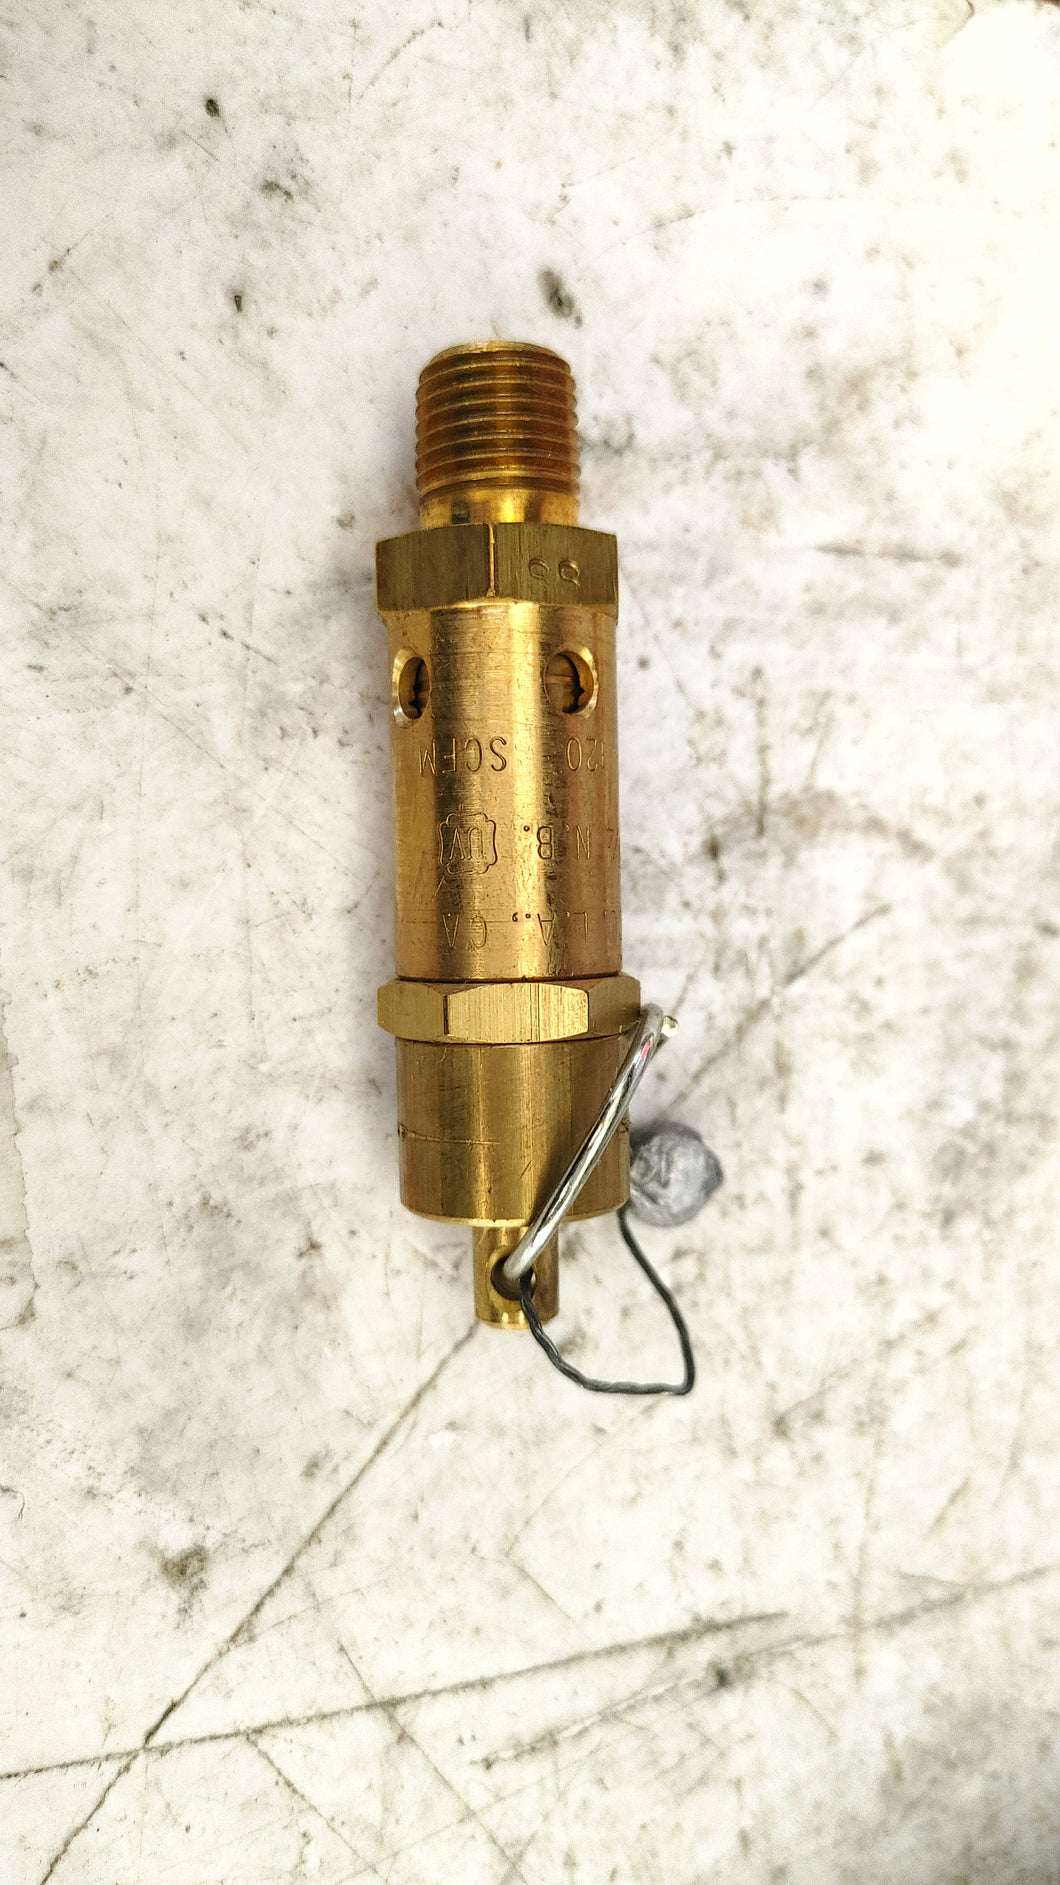 112C, 112 - Kingston Co. - Safety Relief Valve